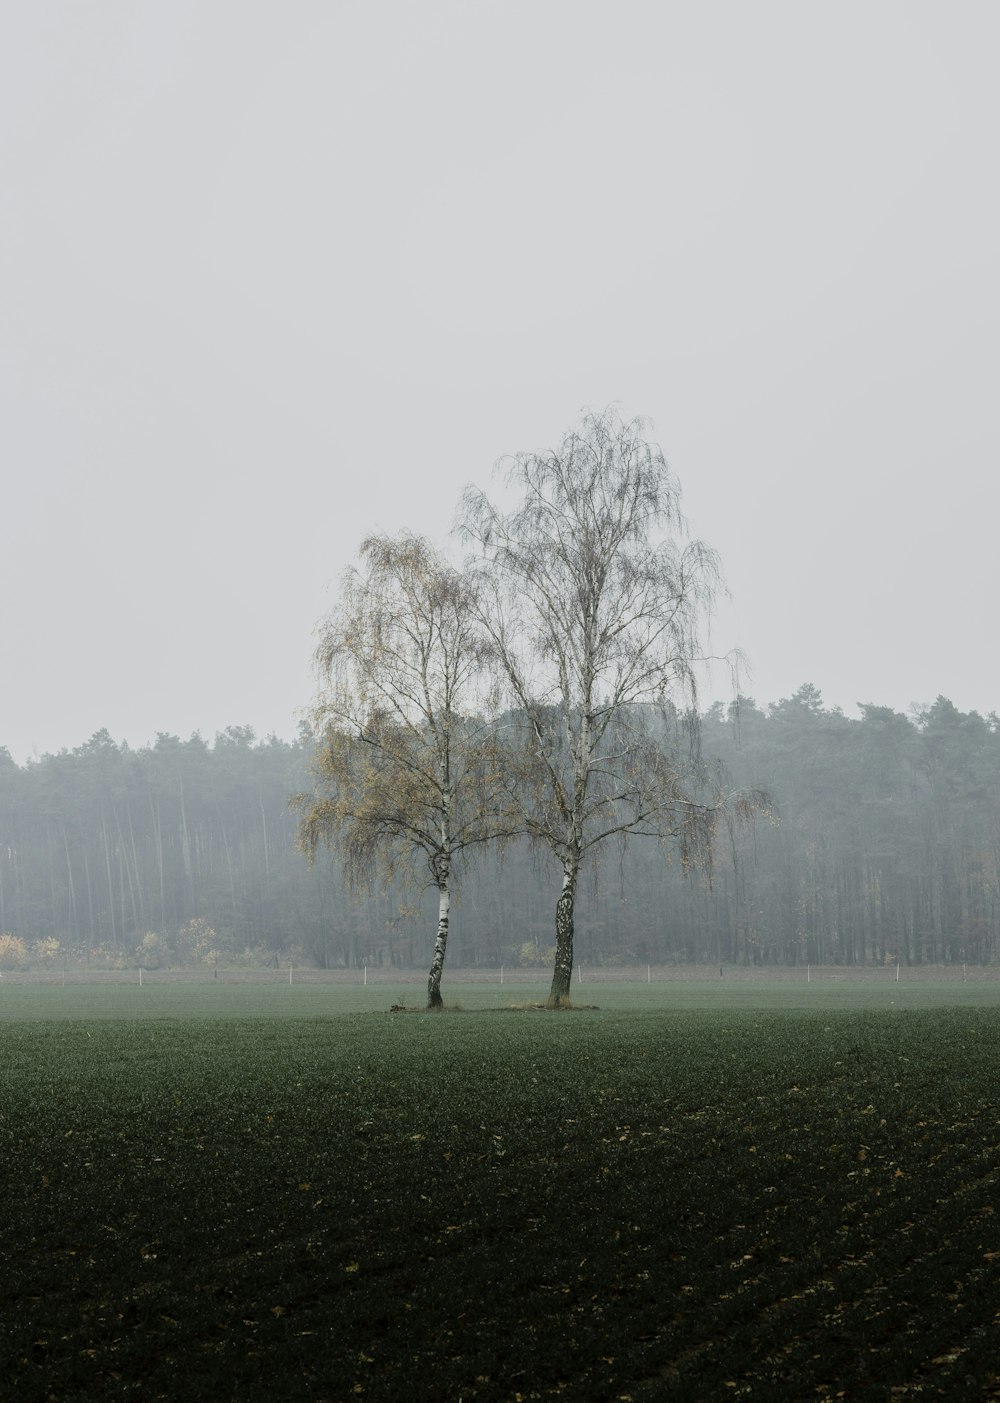 two trees in a field with fog in the background